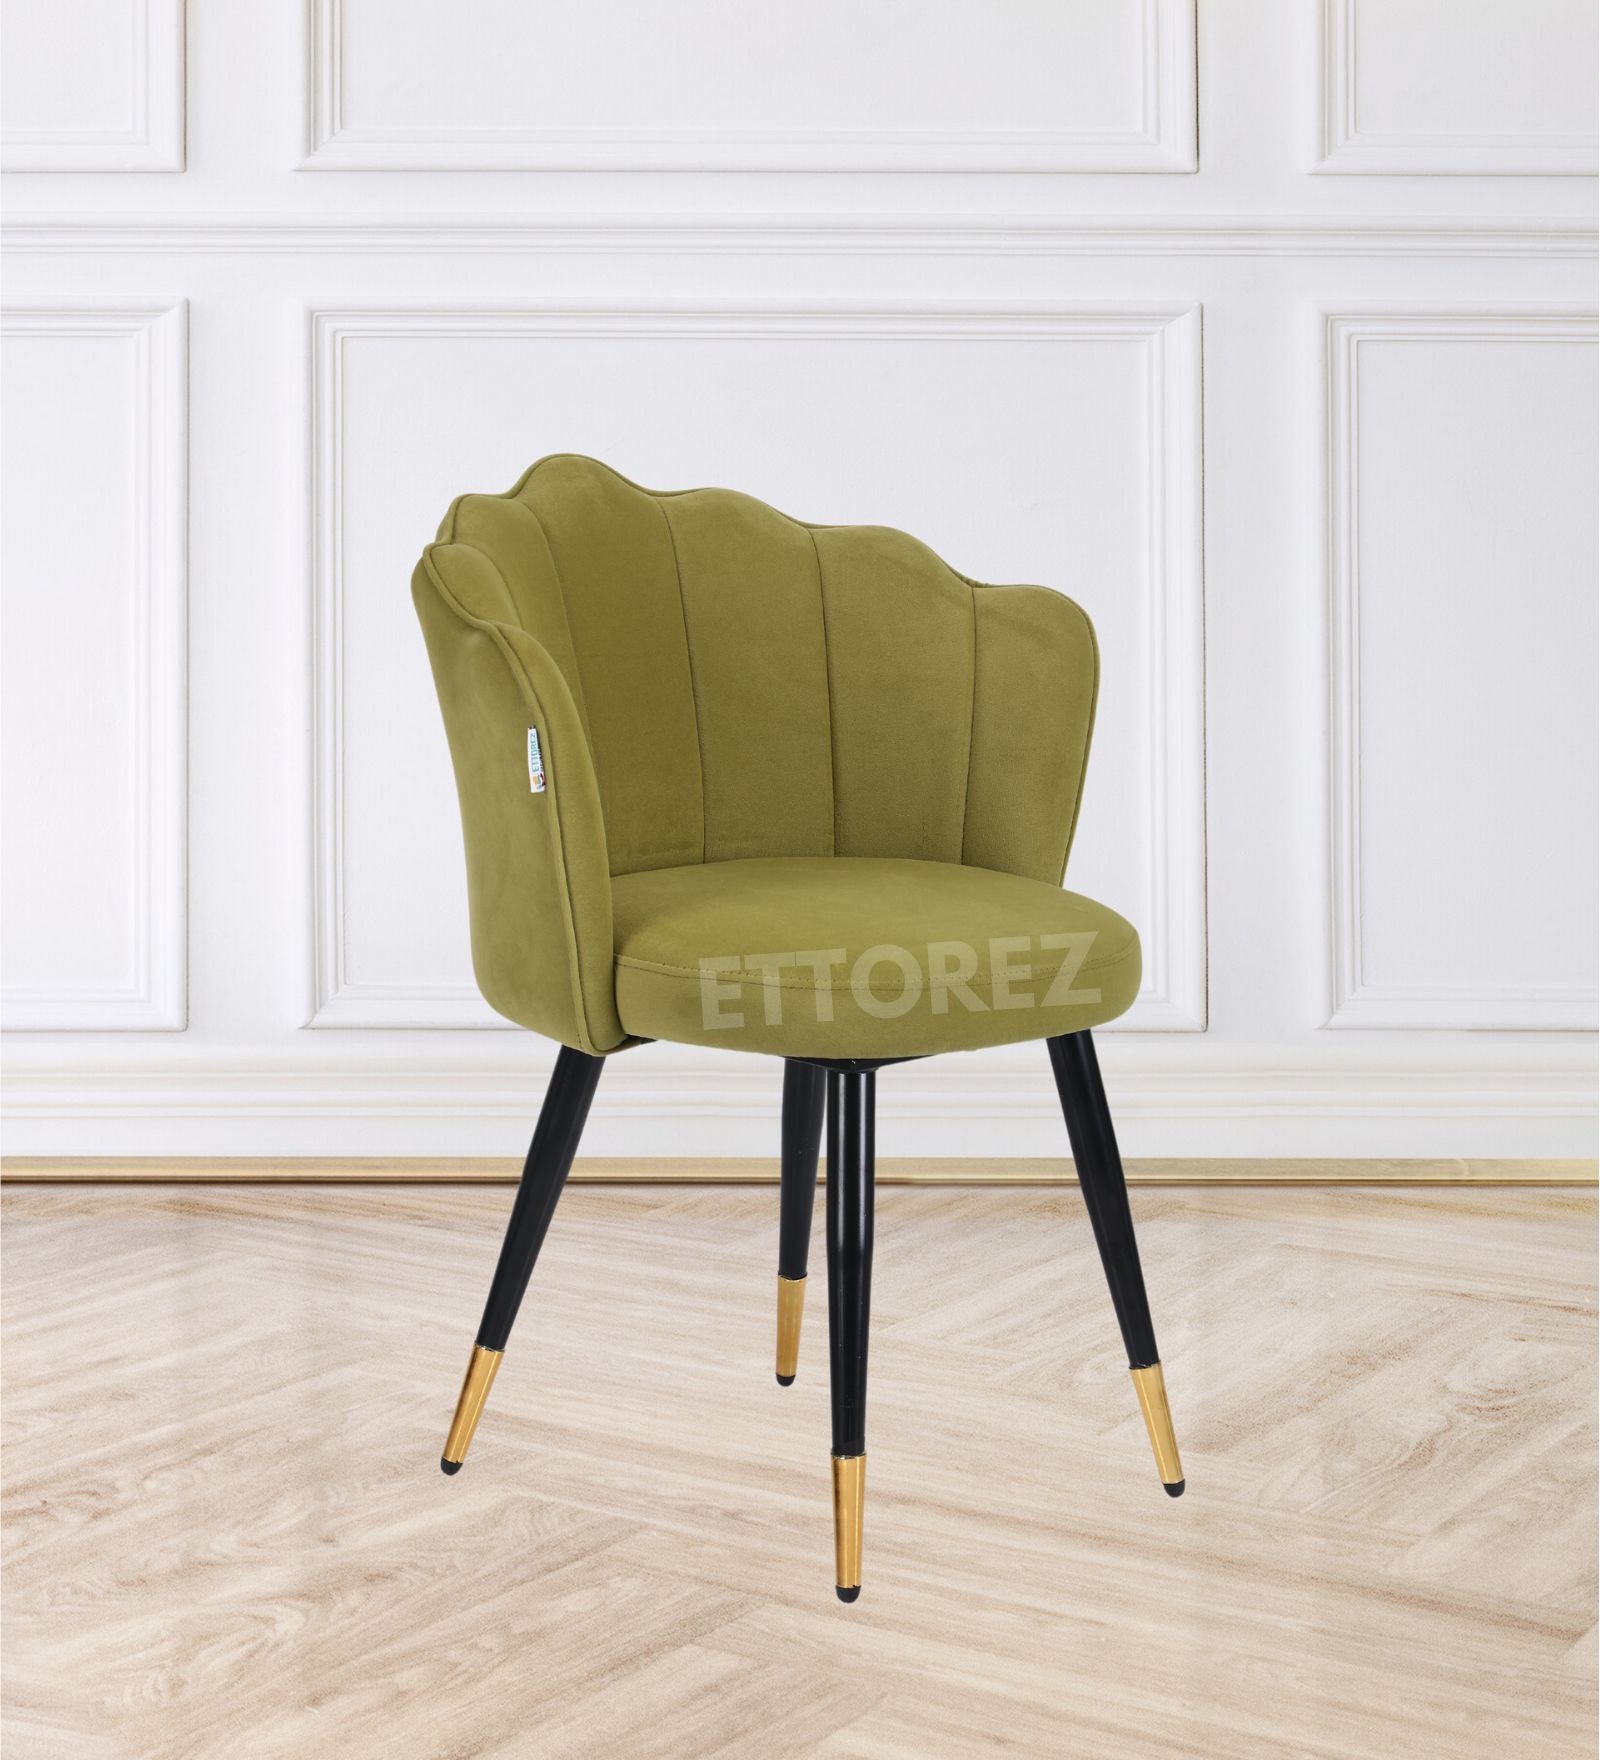 Ettorez BLOOM-OLIVE GREEN Contemporary Accent Chair